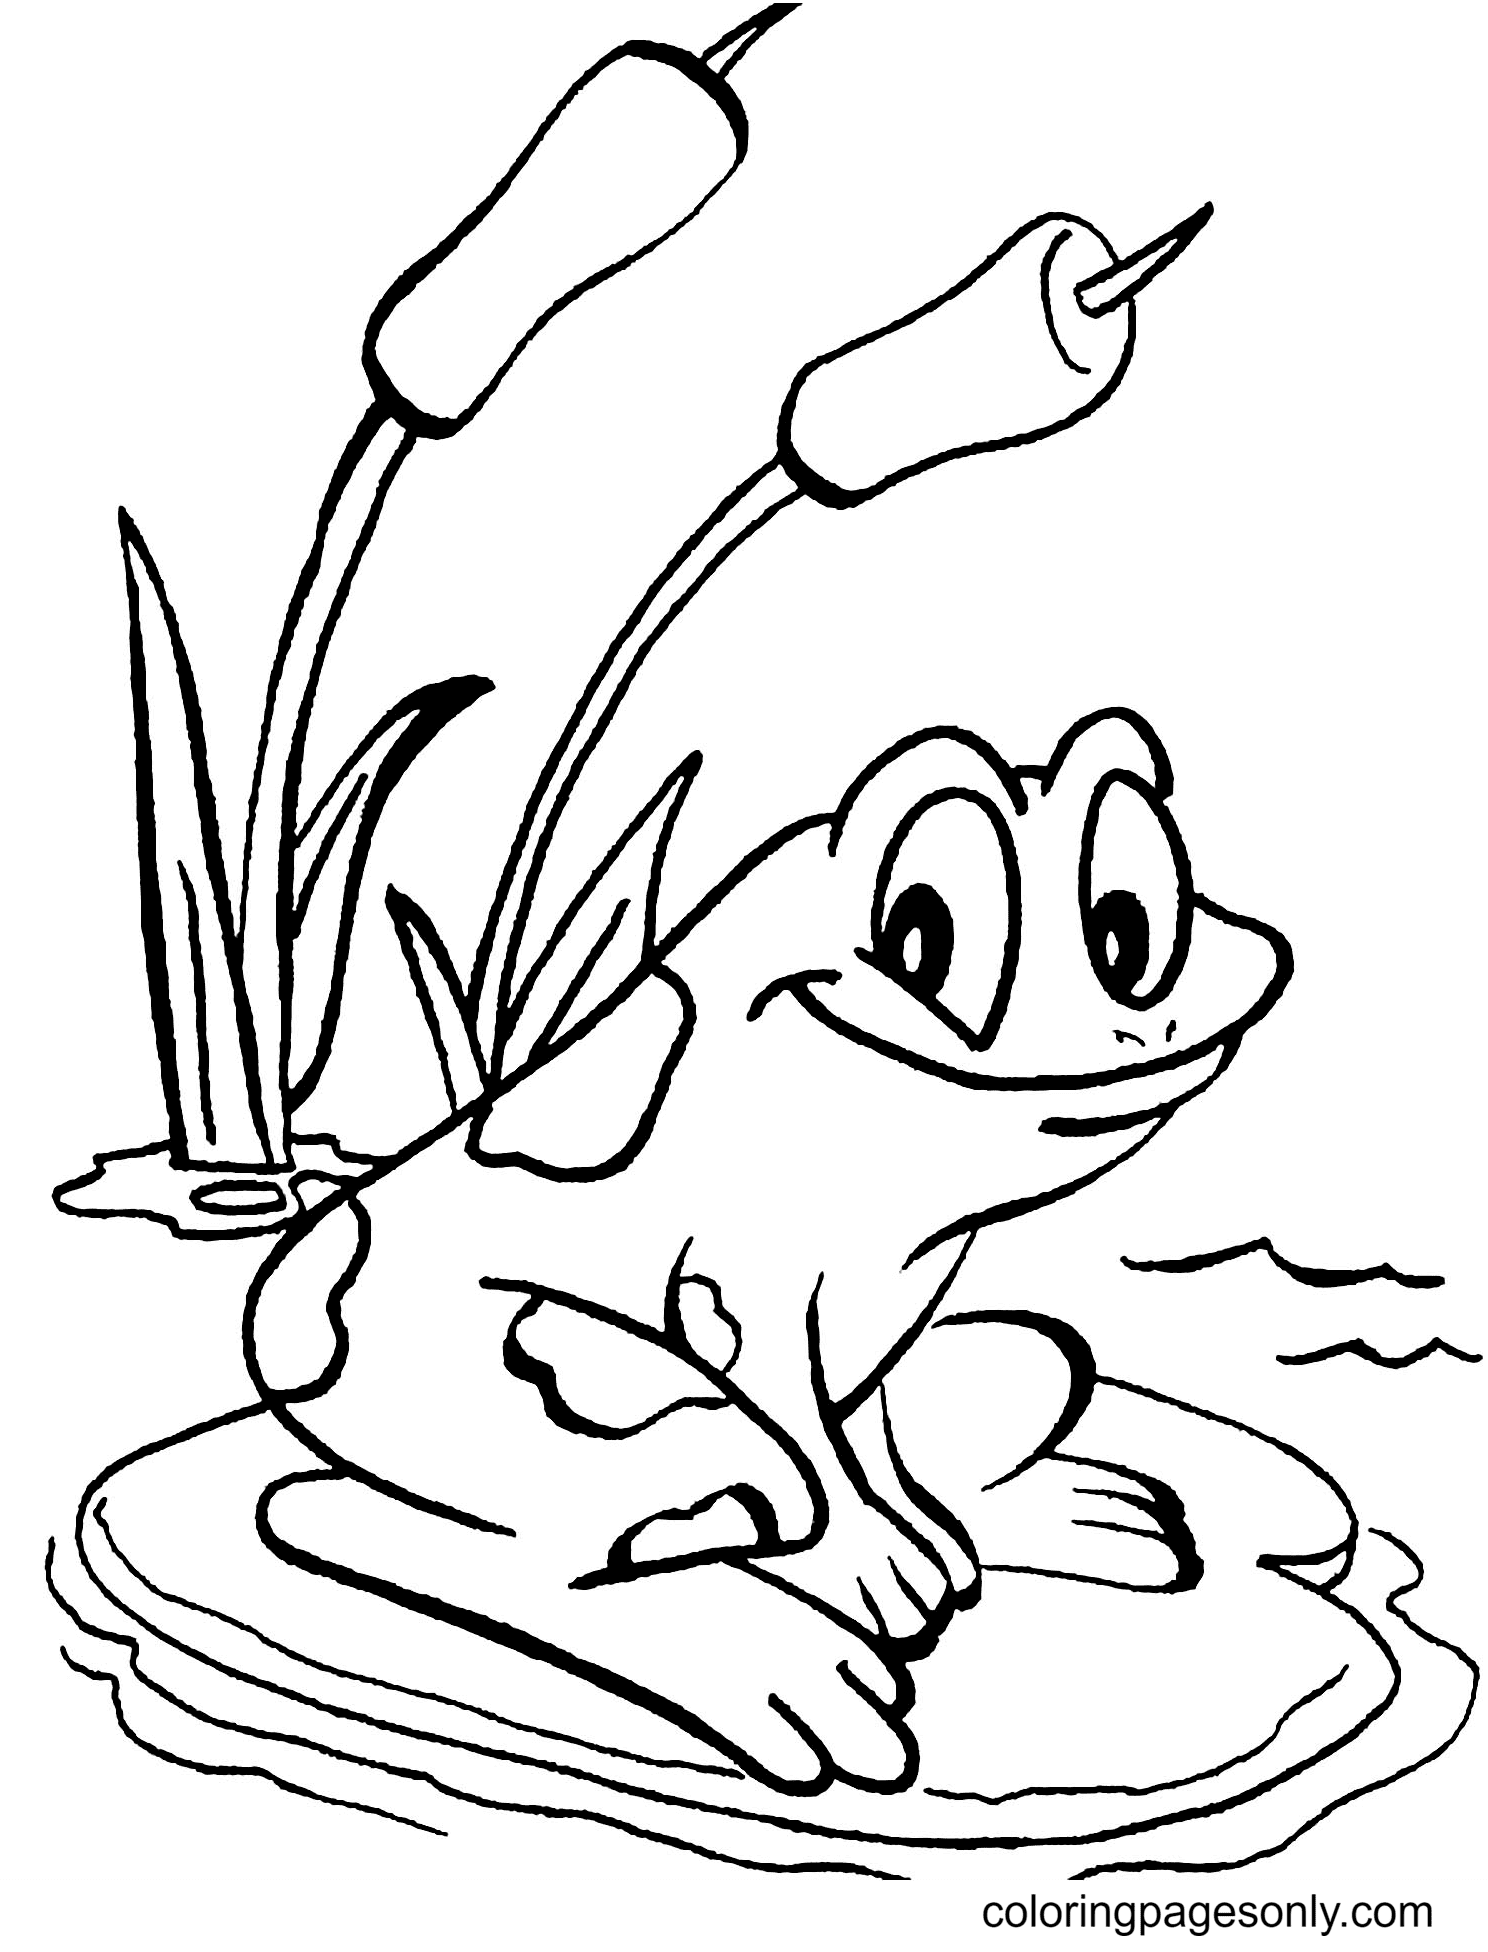 Frog to Download For Free Coloring Pages